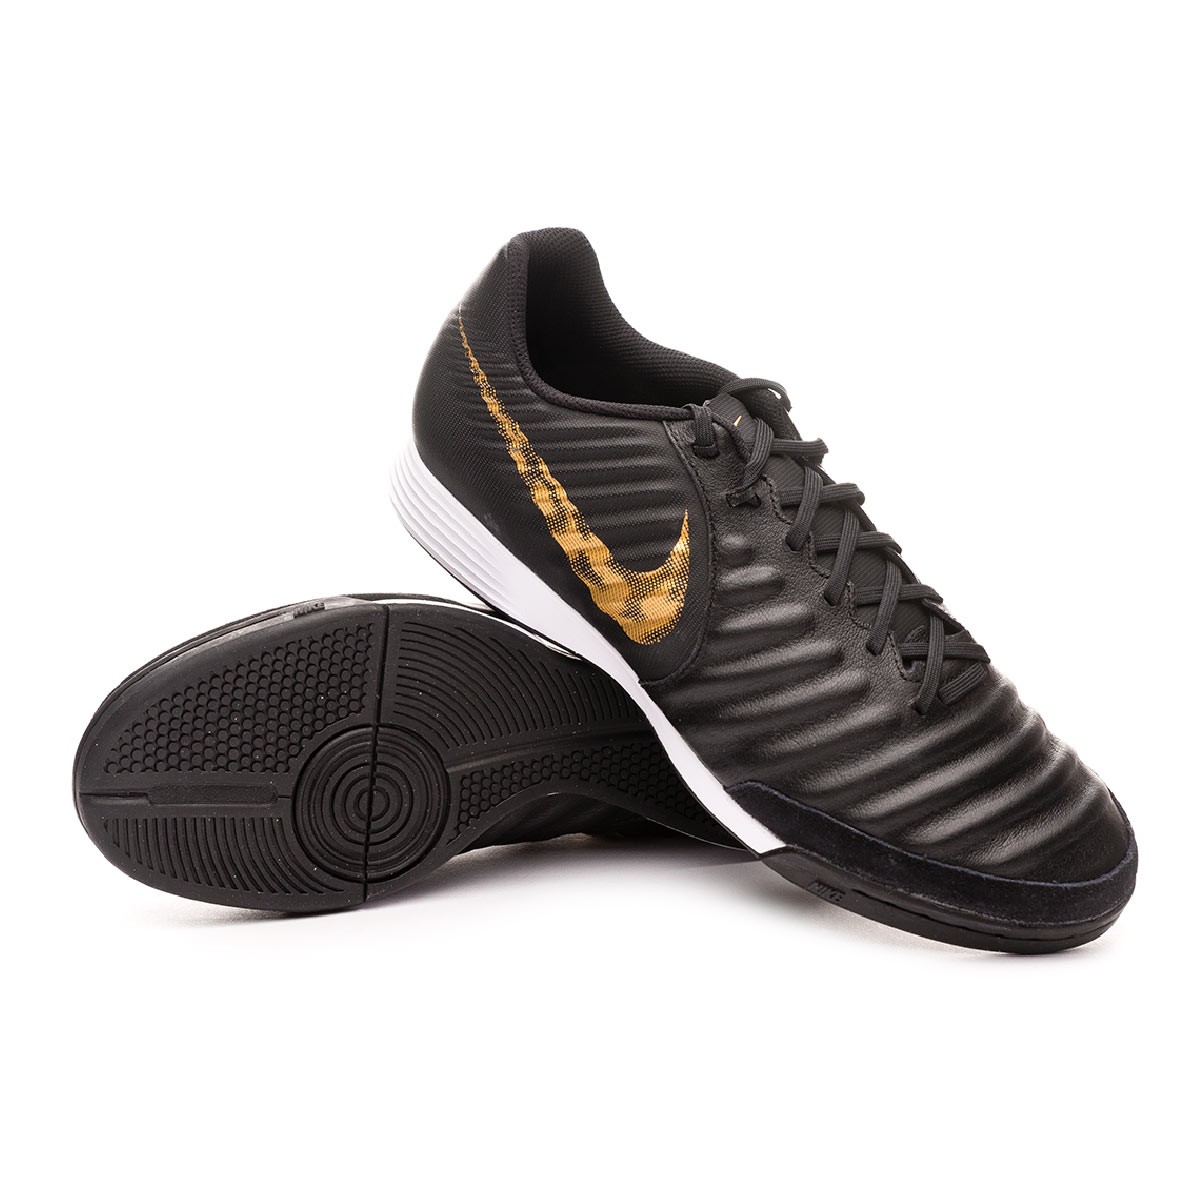 tiempo legend 7 academy ic buy clothes shoes online